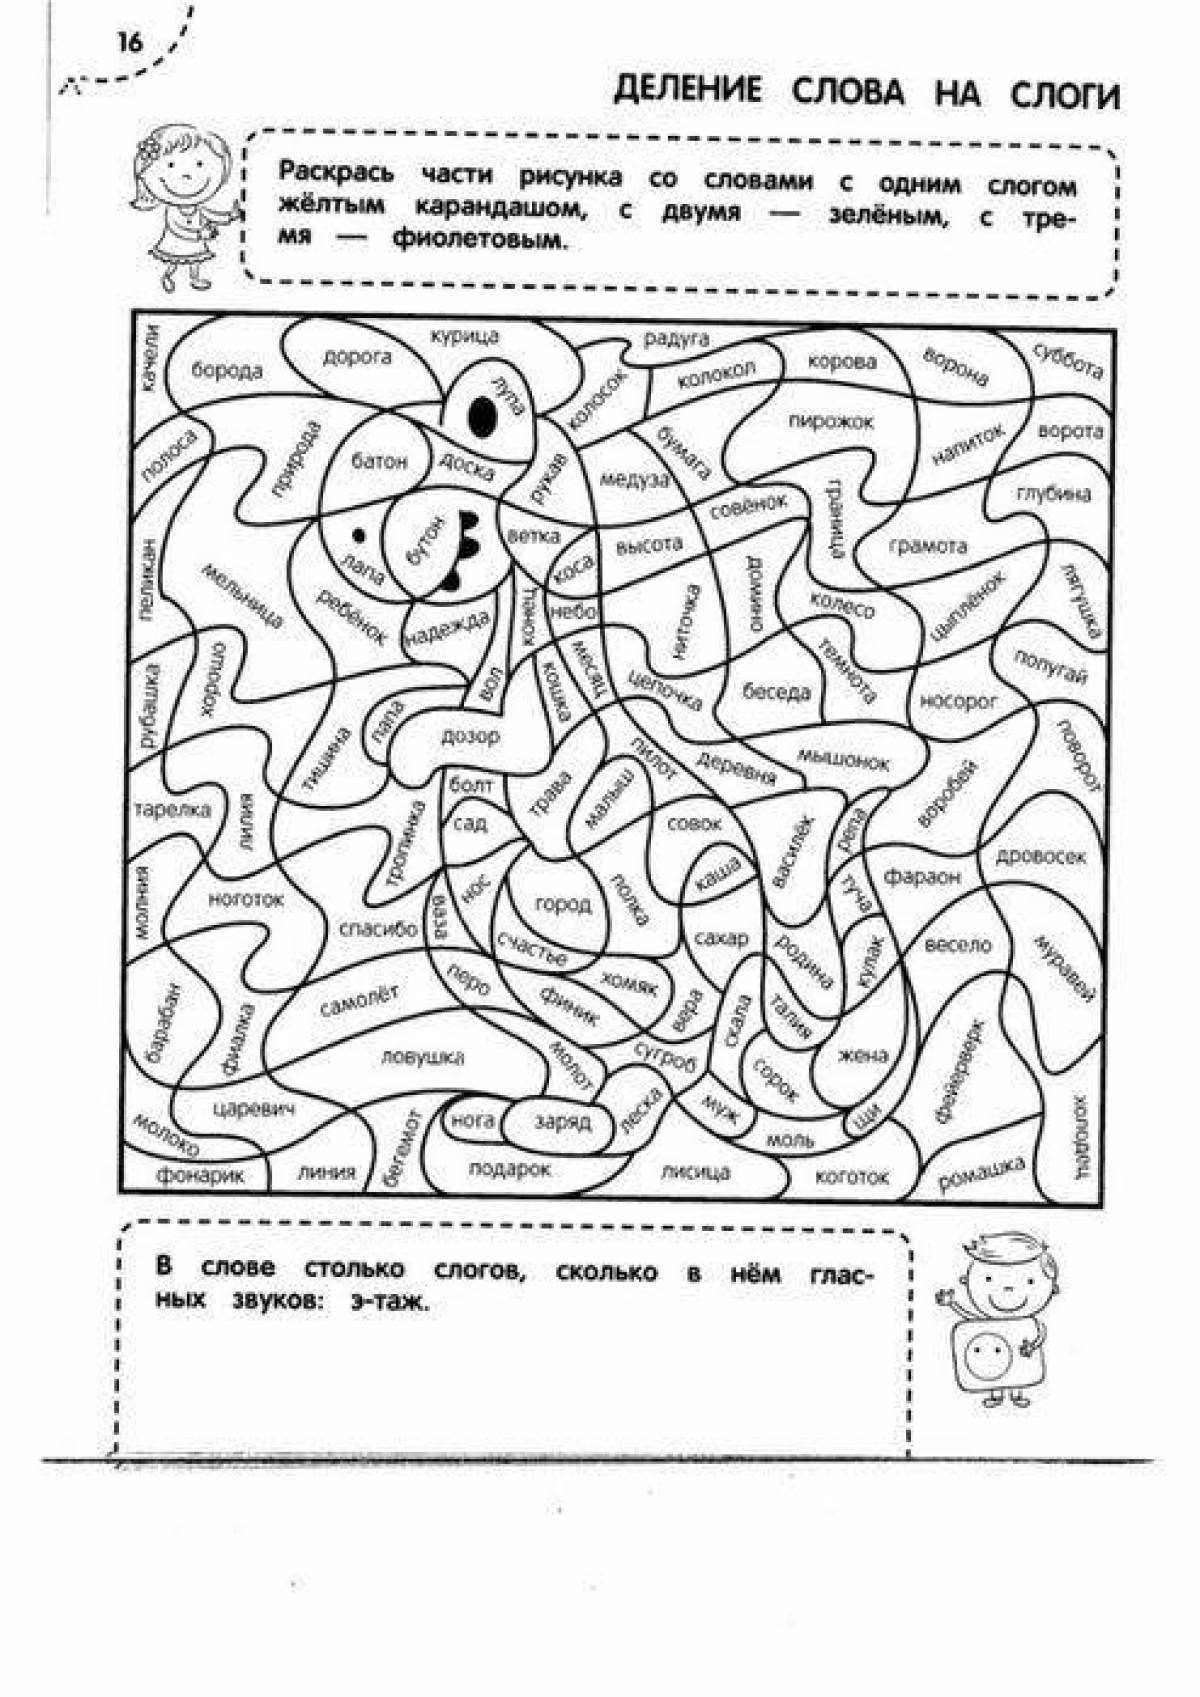 A fascinating coloring book in Russian for grade 1 with interesting tasks